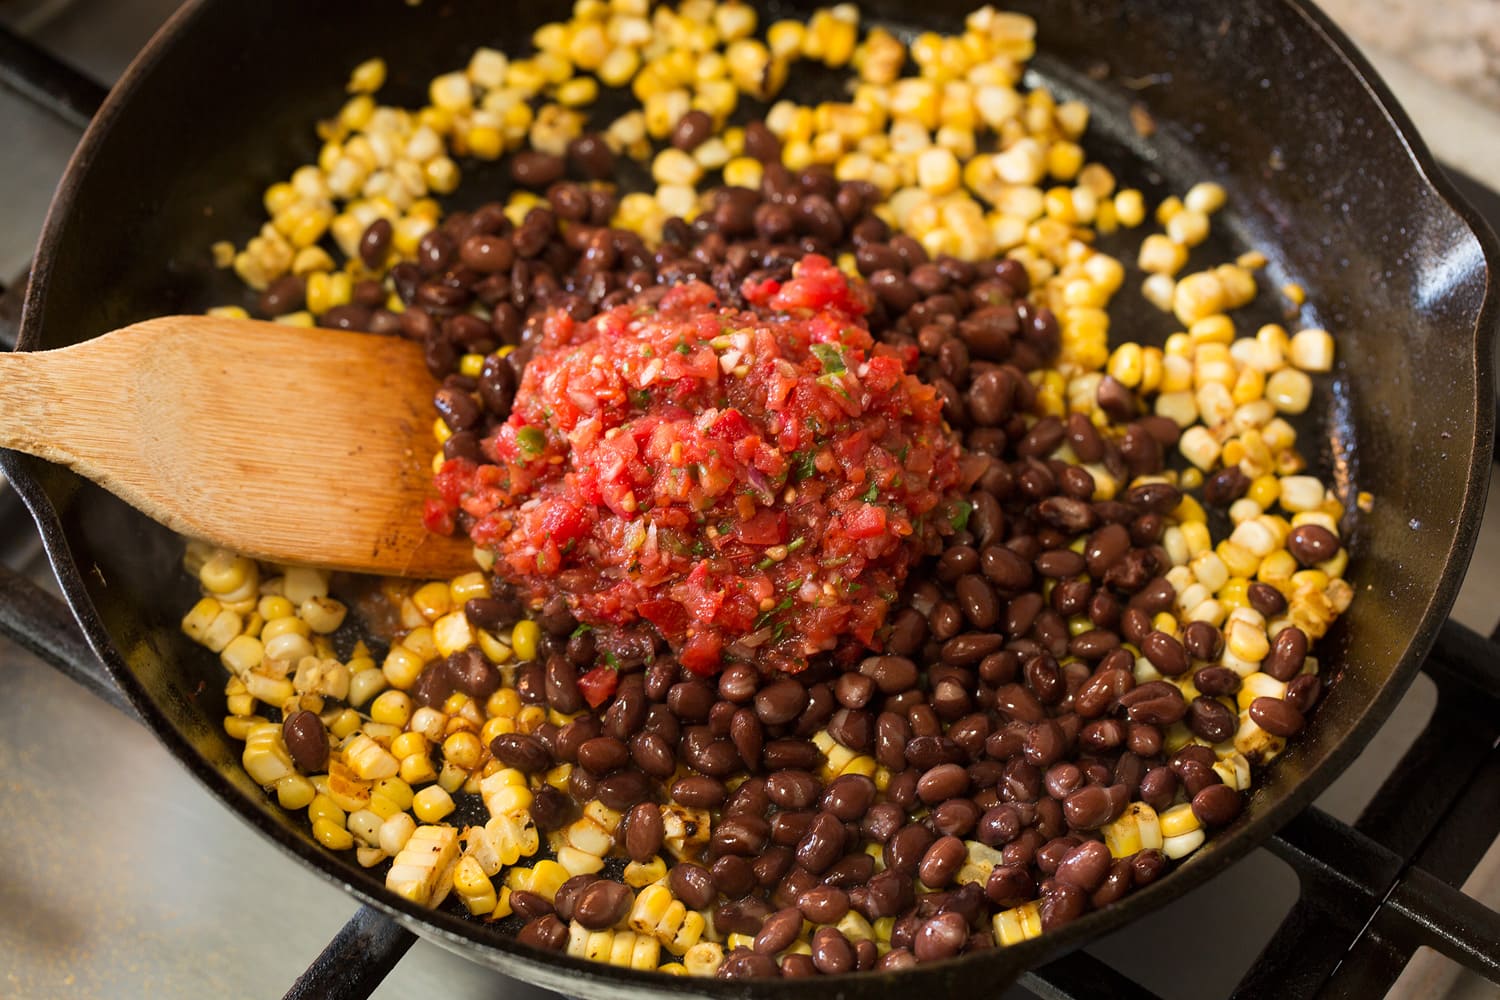 Adding black beans and salsa to corn.